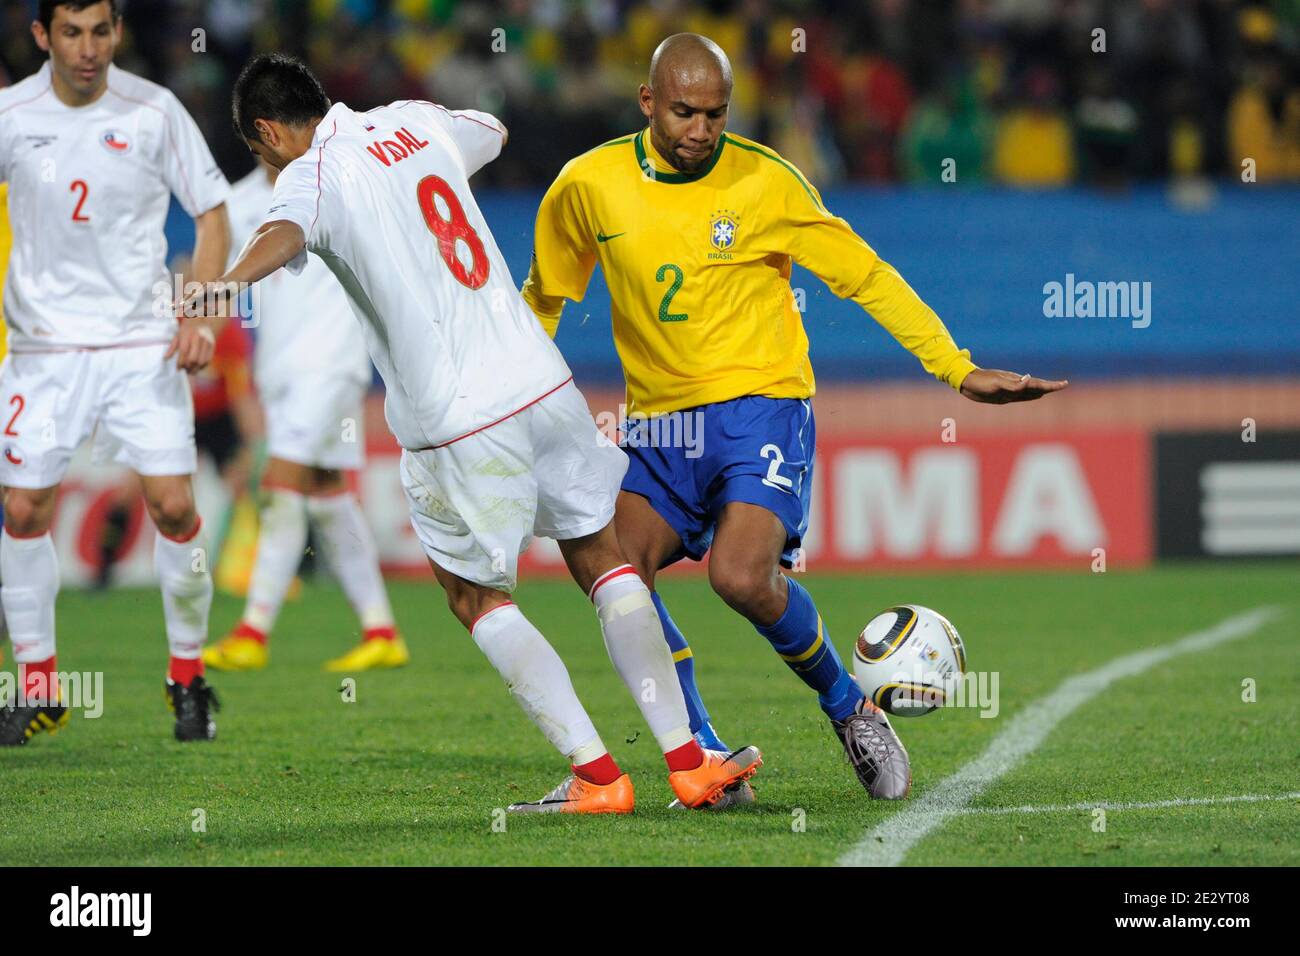 Brazil's Maicon battles Chile's Arturo Vidal during the 2010 FIFA World Cup South Africa 1/8 of final Soccer match, Brazil vs Chile at Ellis Park football stadium in Johannesburg, South Africa on June 28, 2010. Brazil won 3-0. Photo by Henri Szwarc/Cameleon/ABACAPRESS.COM Stock Photo